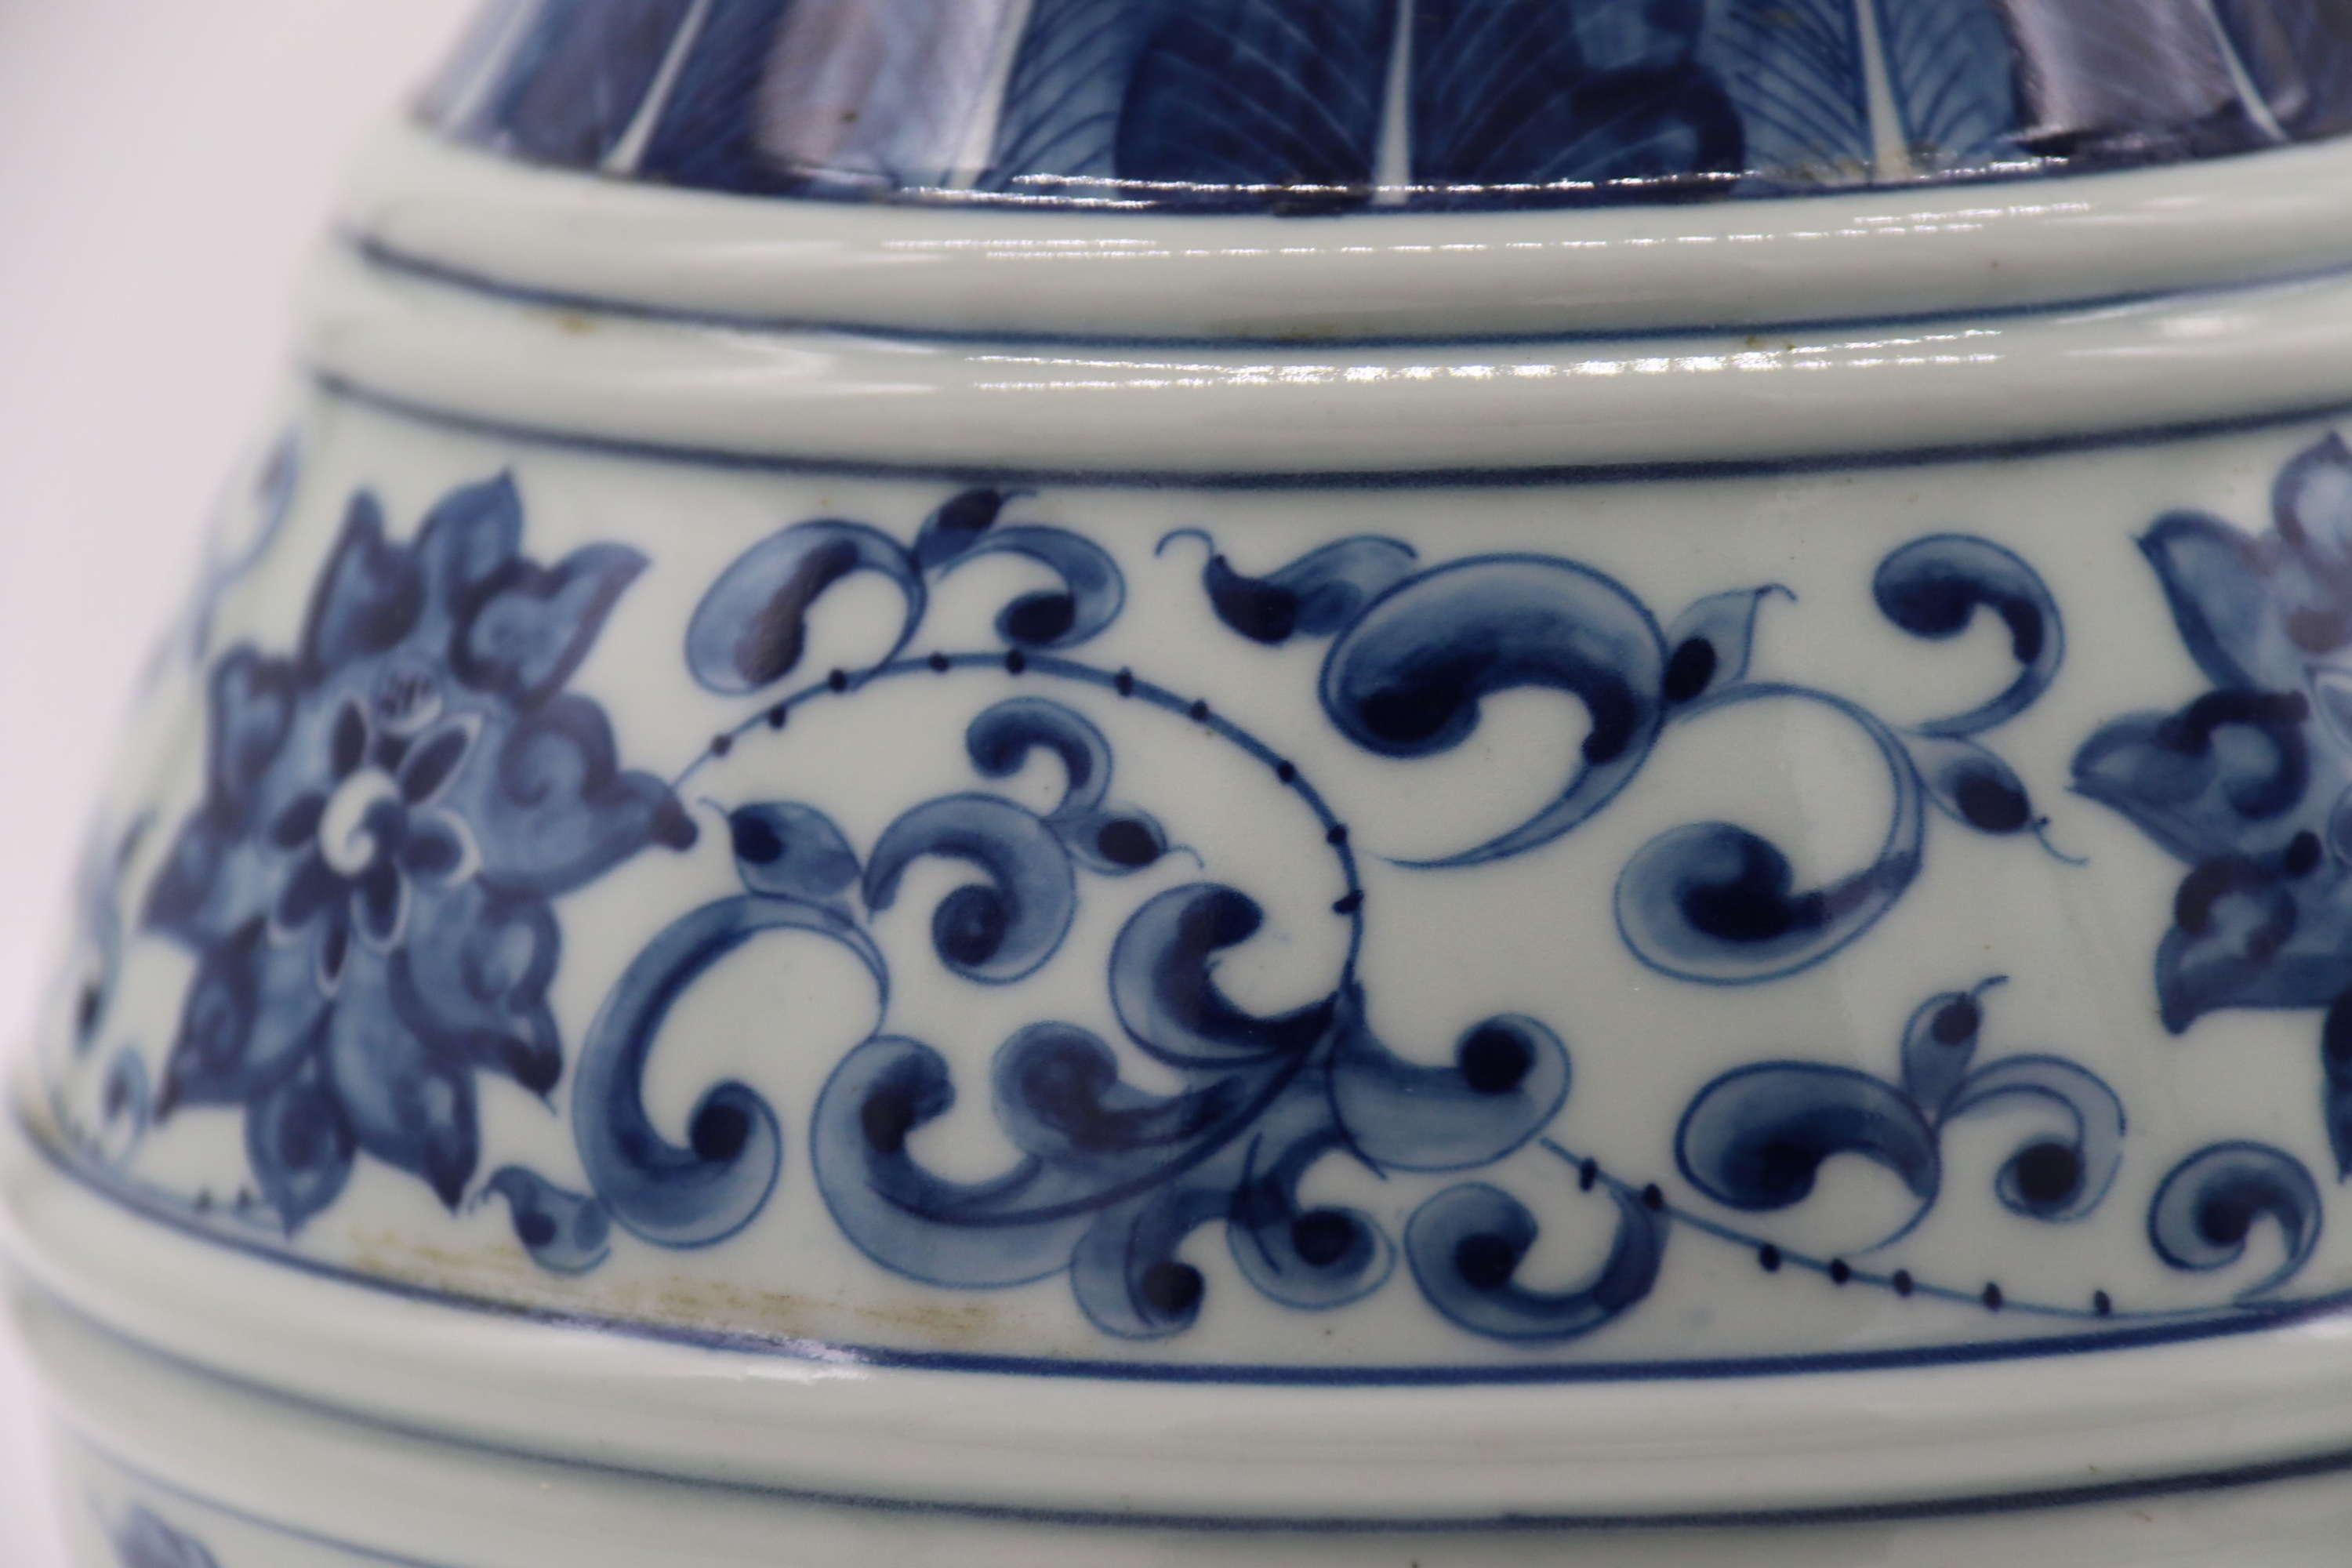 Pair of Chinese Hand Painted Blue and White Vases, Circa 1930

An impressive and unusual pair of Chinese porcelain vases made to a traditional shape with a raised foot and bulbous shaped body narrowing to a flared neck. The vases have four panels of